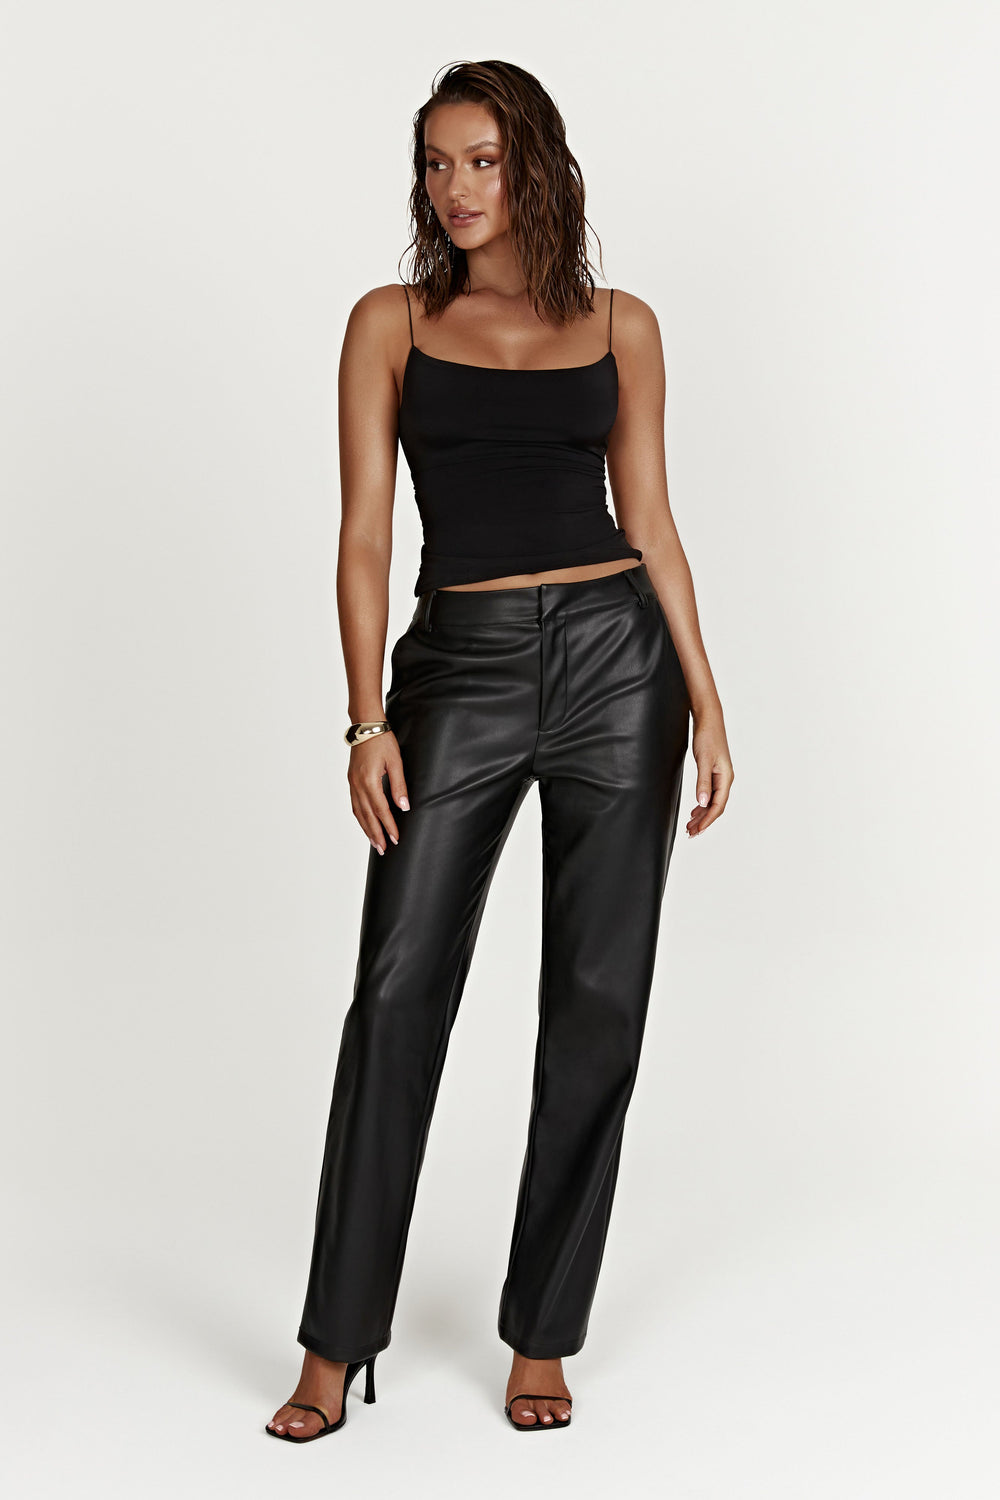 Matilda Slouchy Low Rise Faux Leather Pant - Black